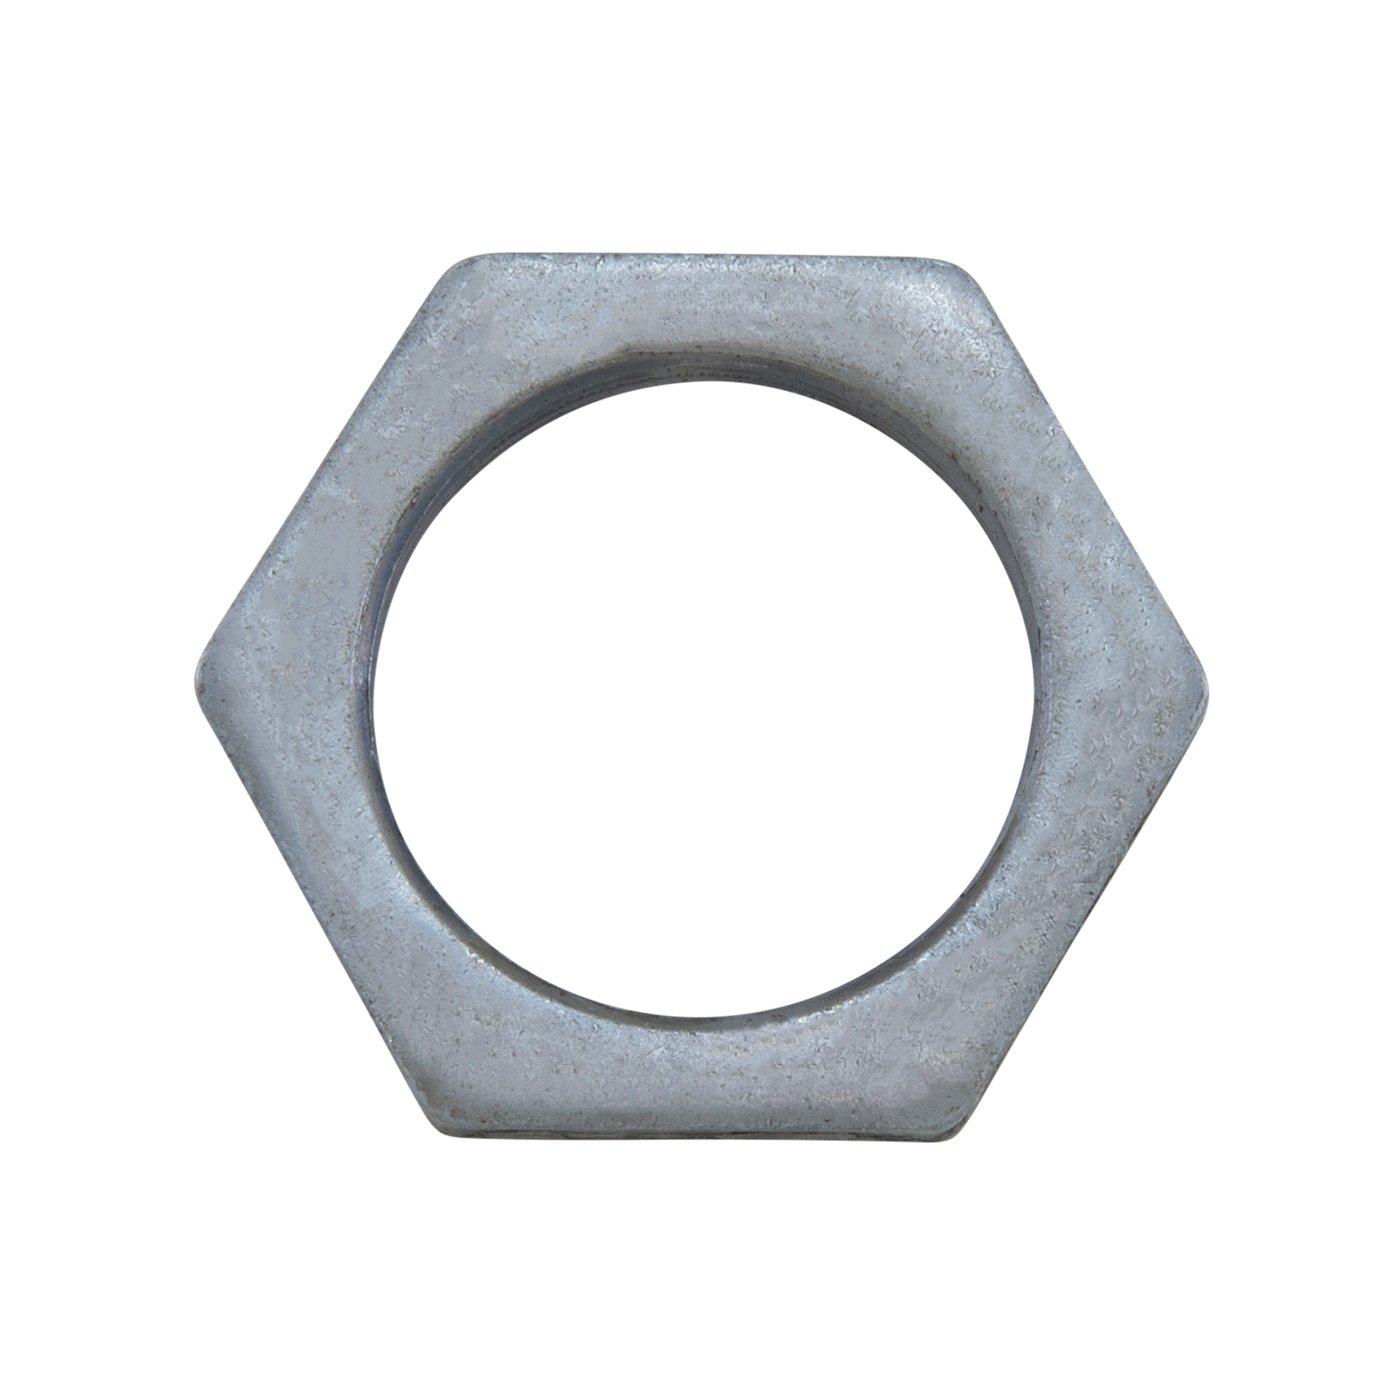 Spindle Nut Retainer For Dana 60 & 70, 1.830 in. I.D., 10 Outer Tabs.